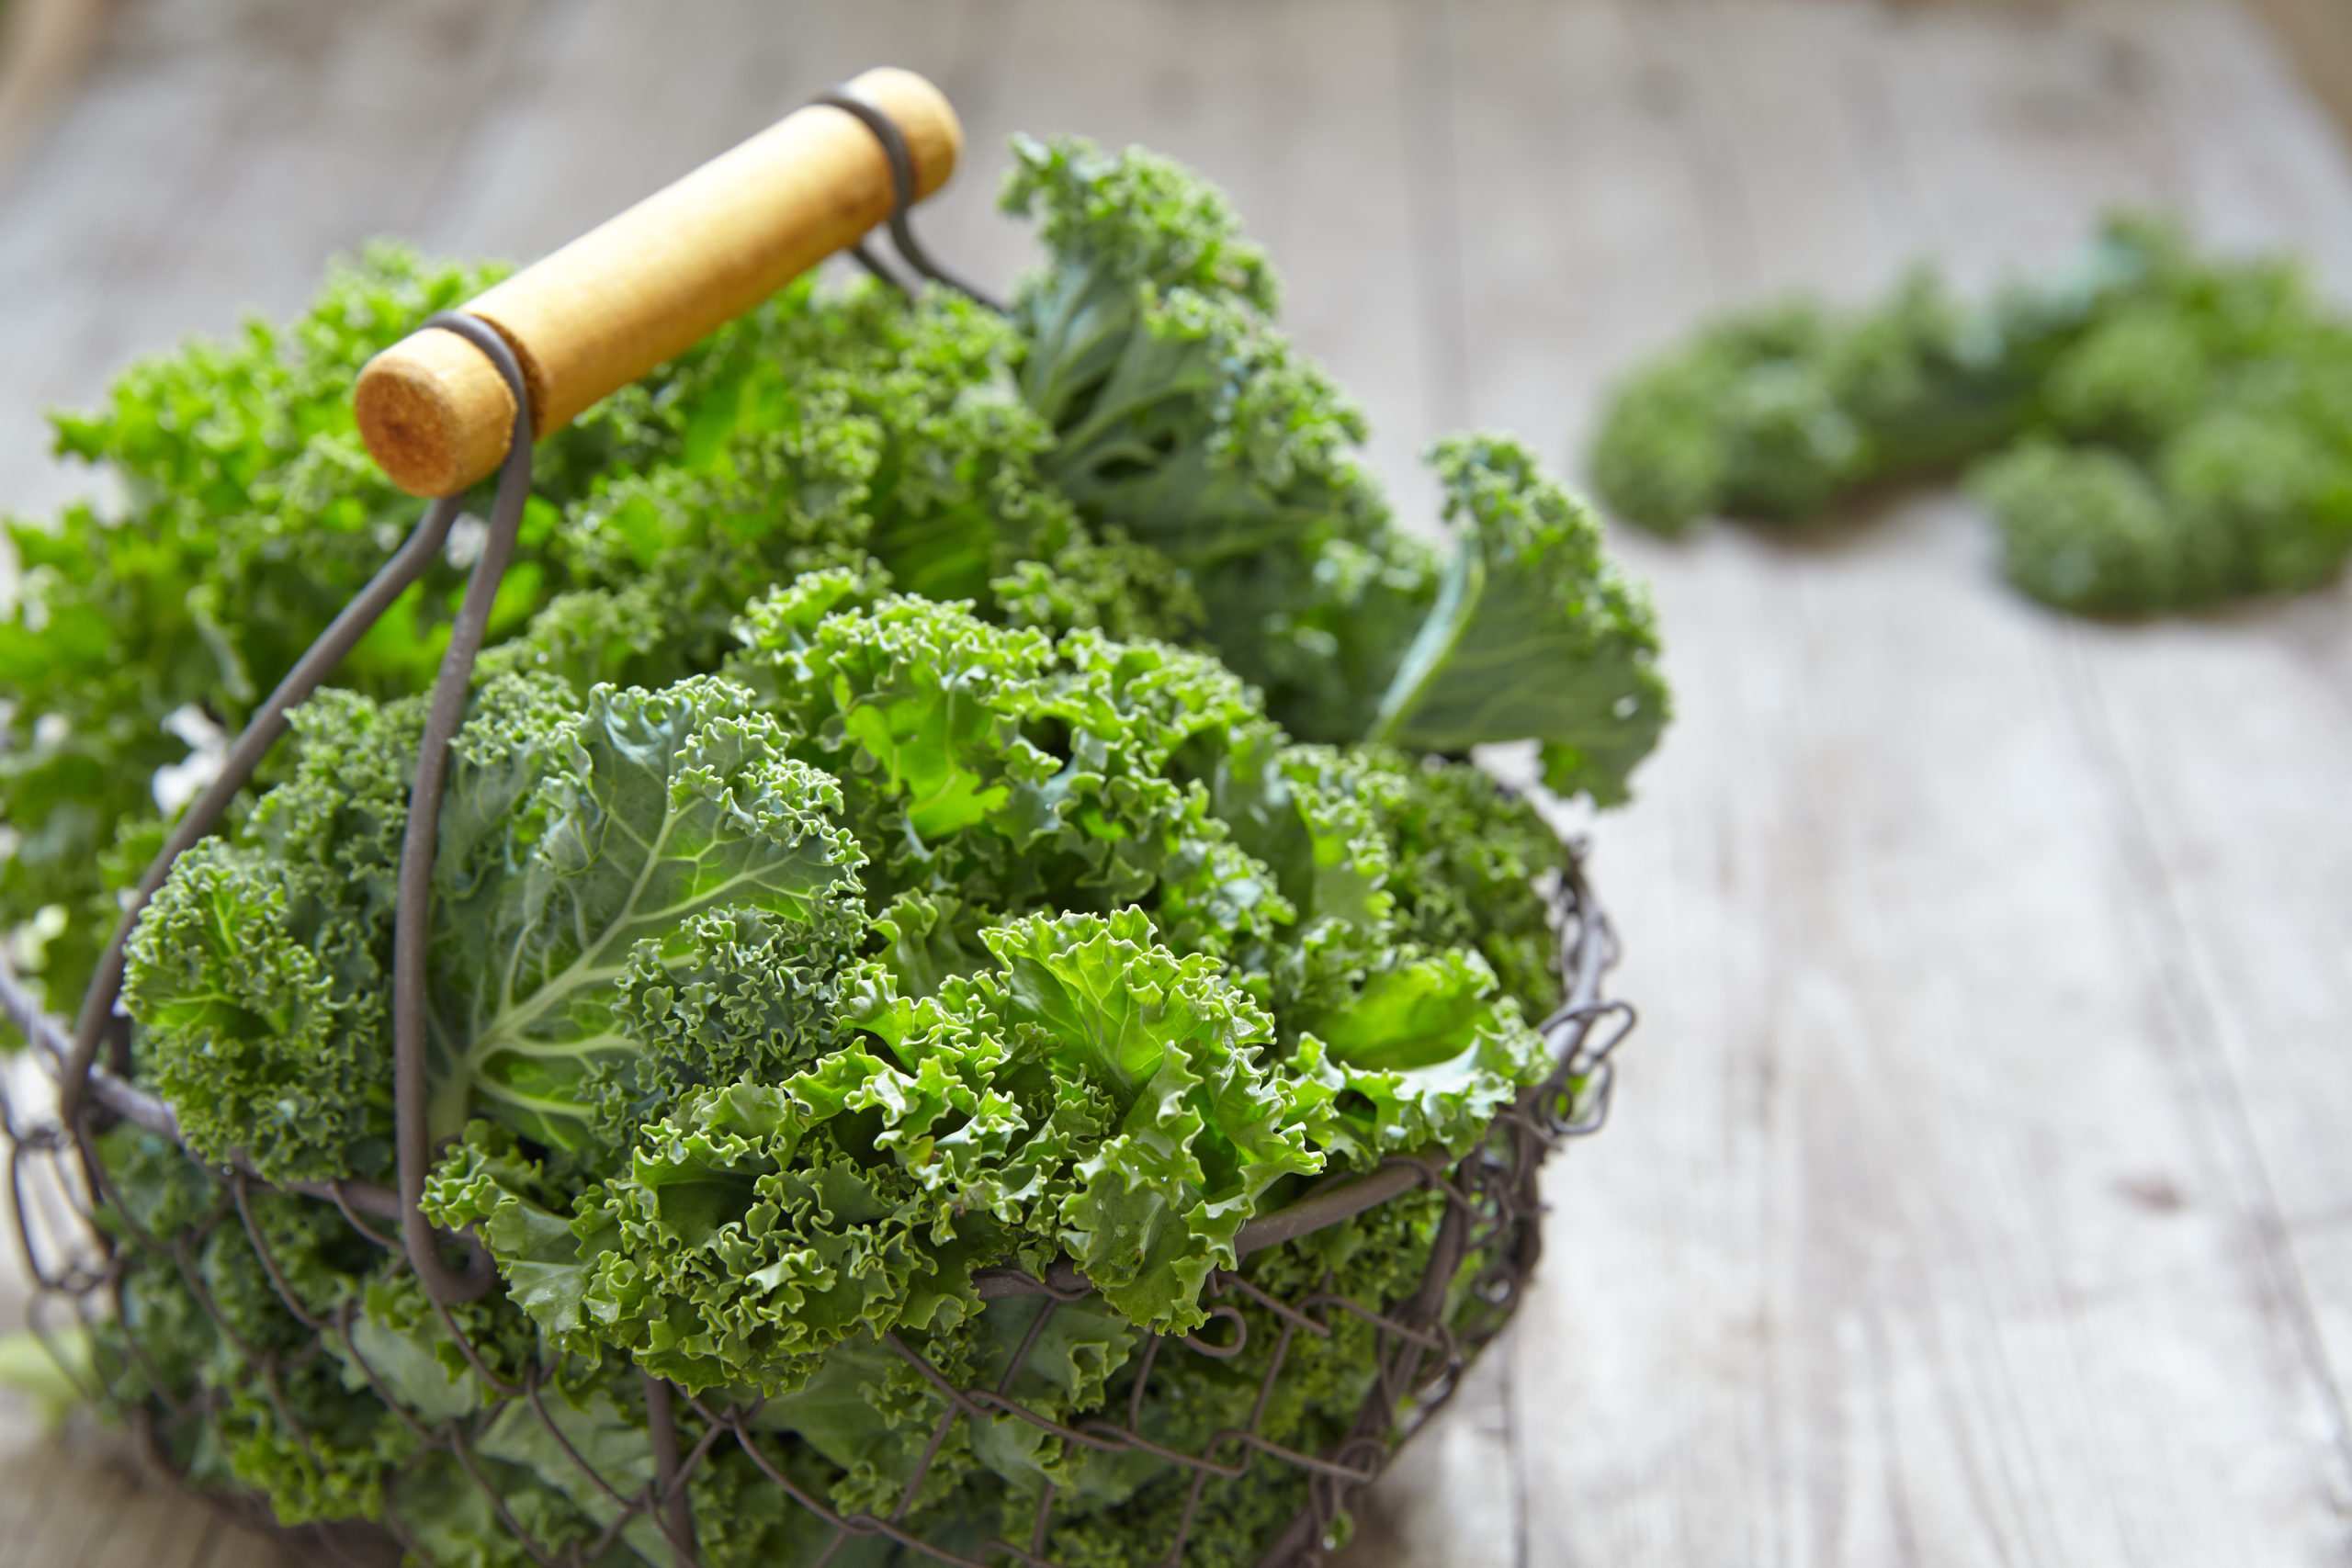 How To Tell If Your Kale Is Bad? - Cully's Kitchen